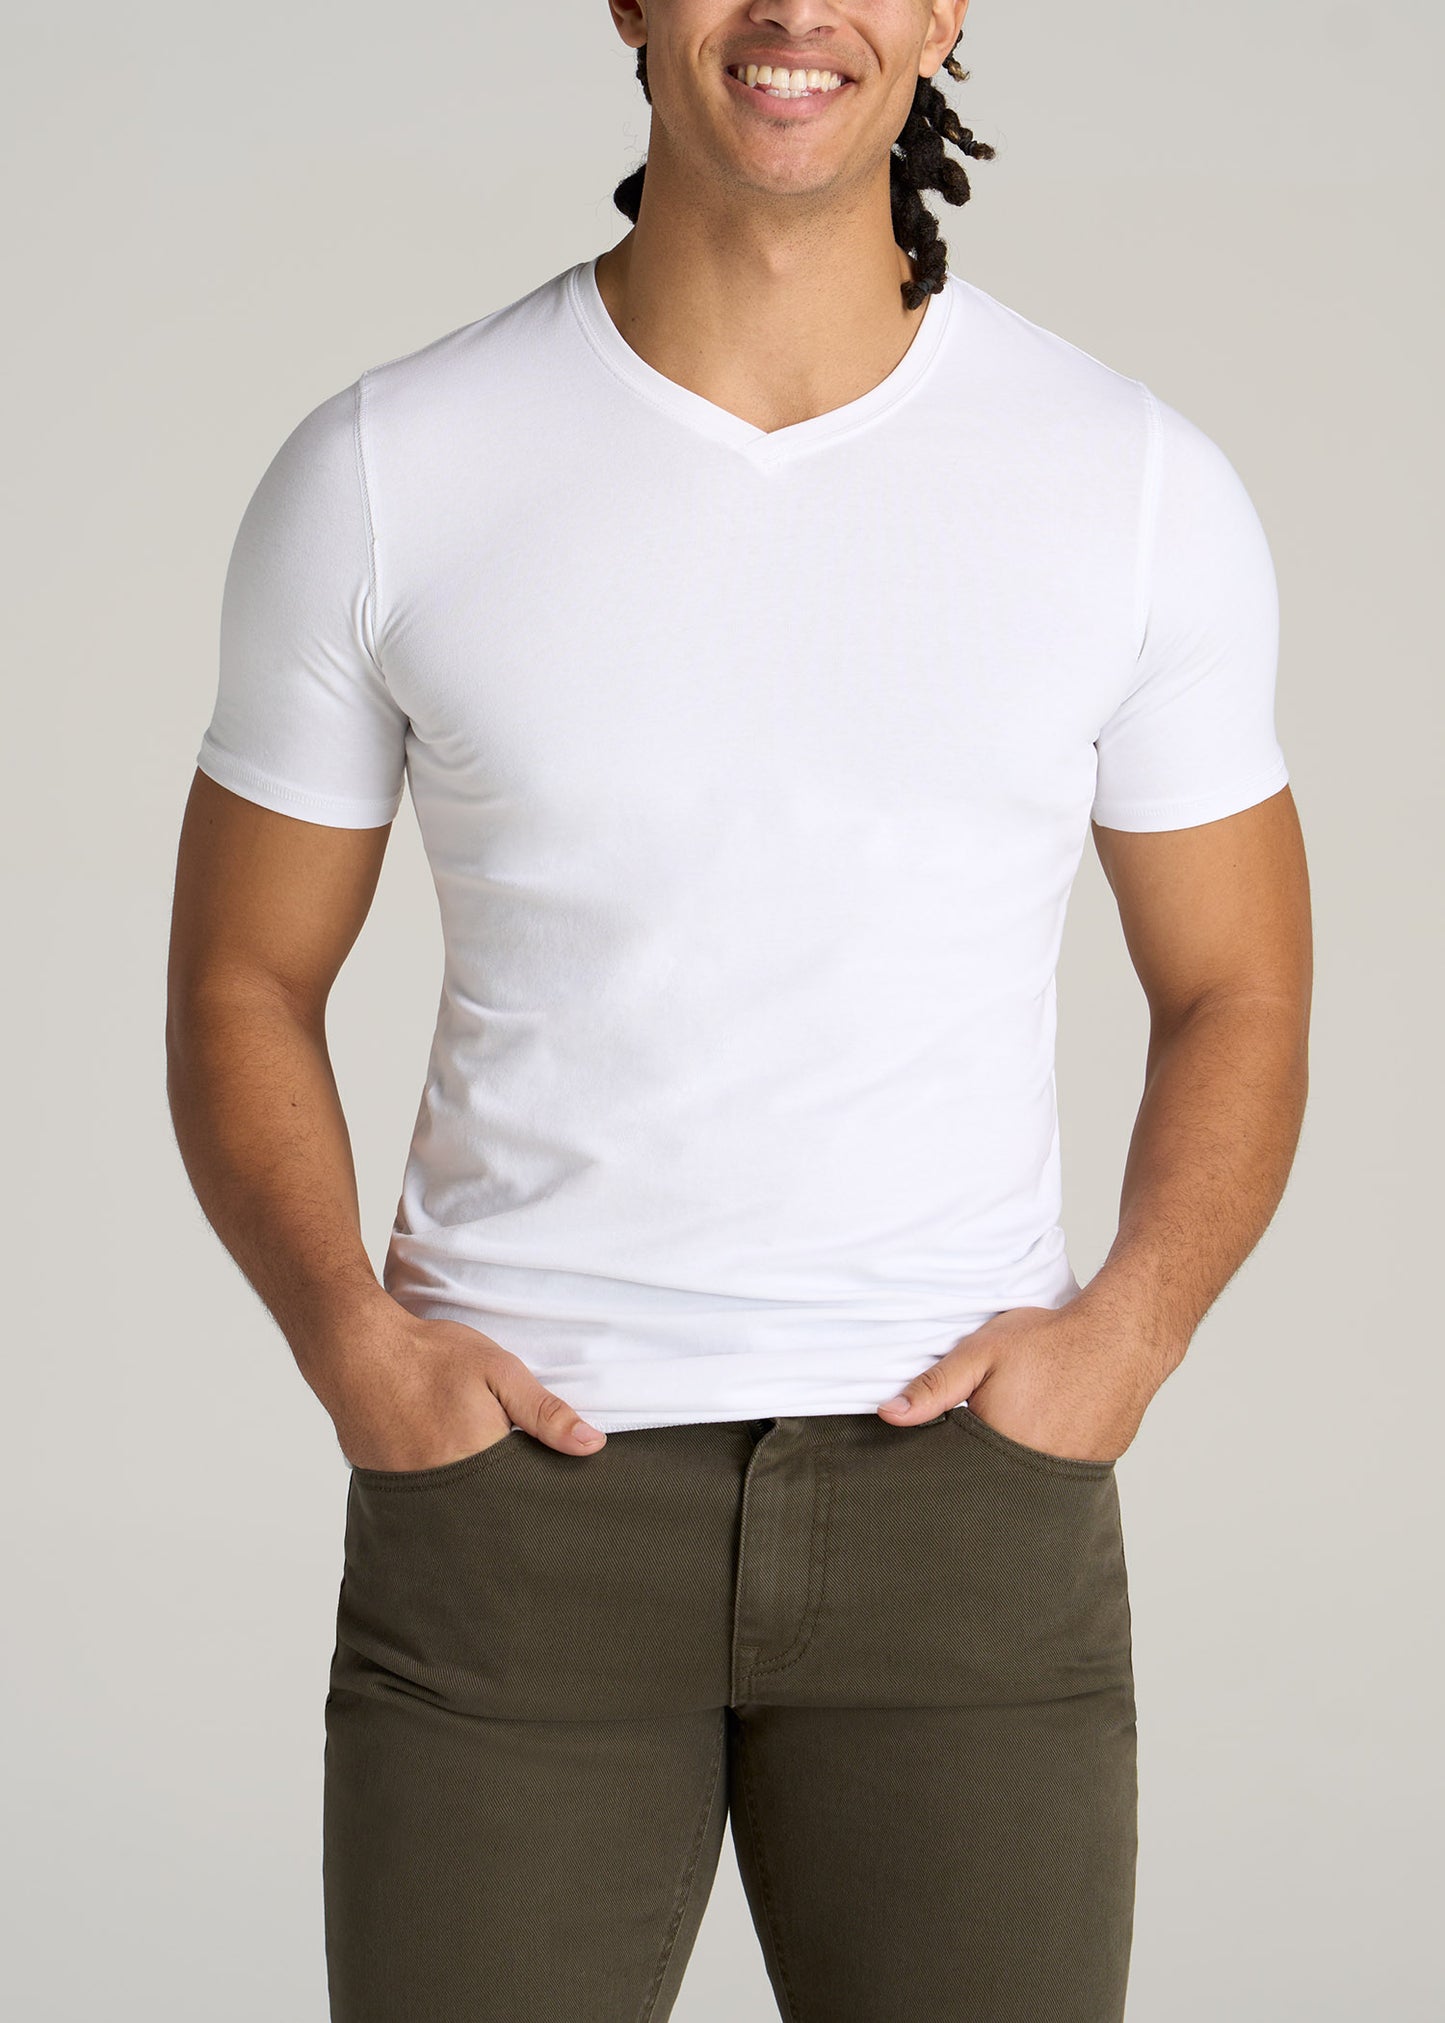 A tall man wearing American Tall's The Essential SLIM-FIT V-Neck Men's Tall Tees in White.